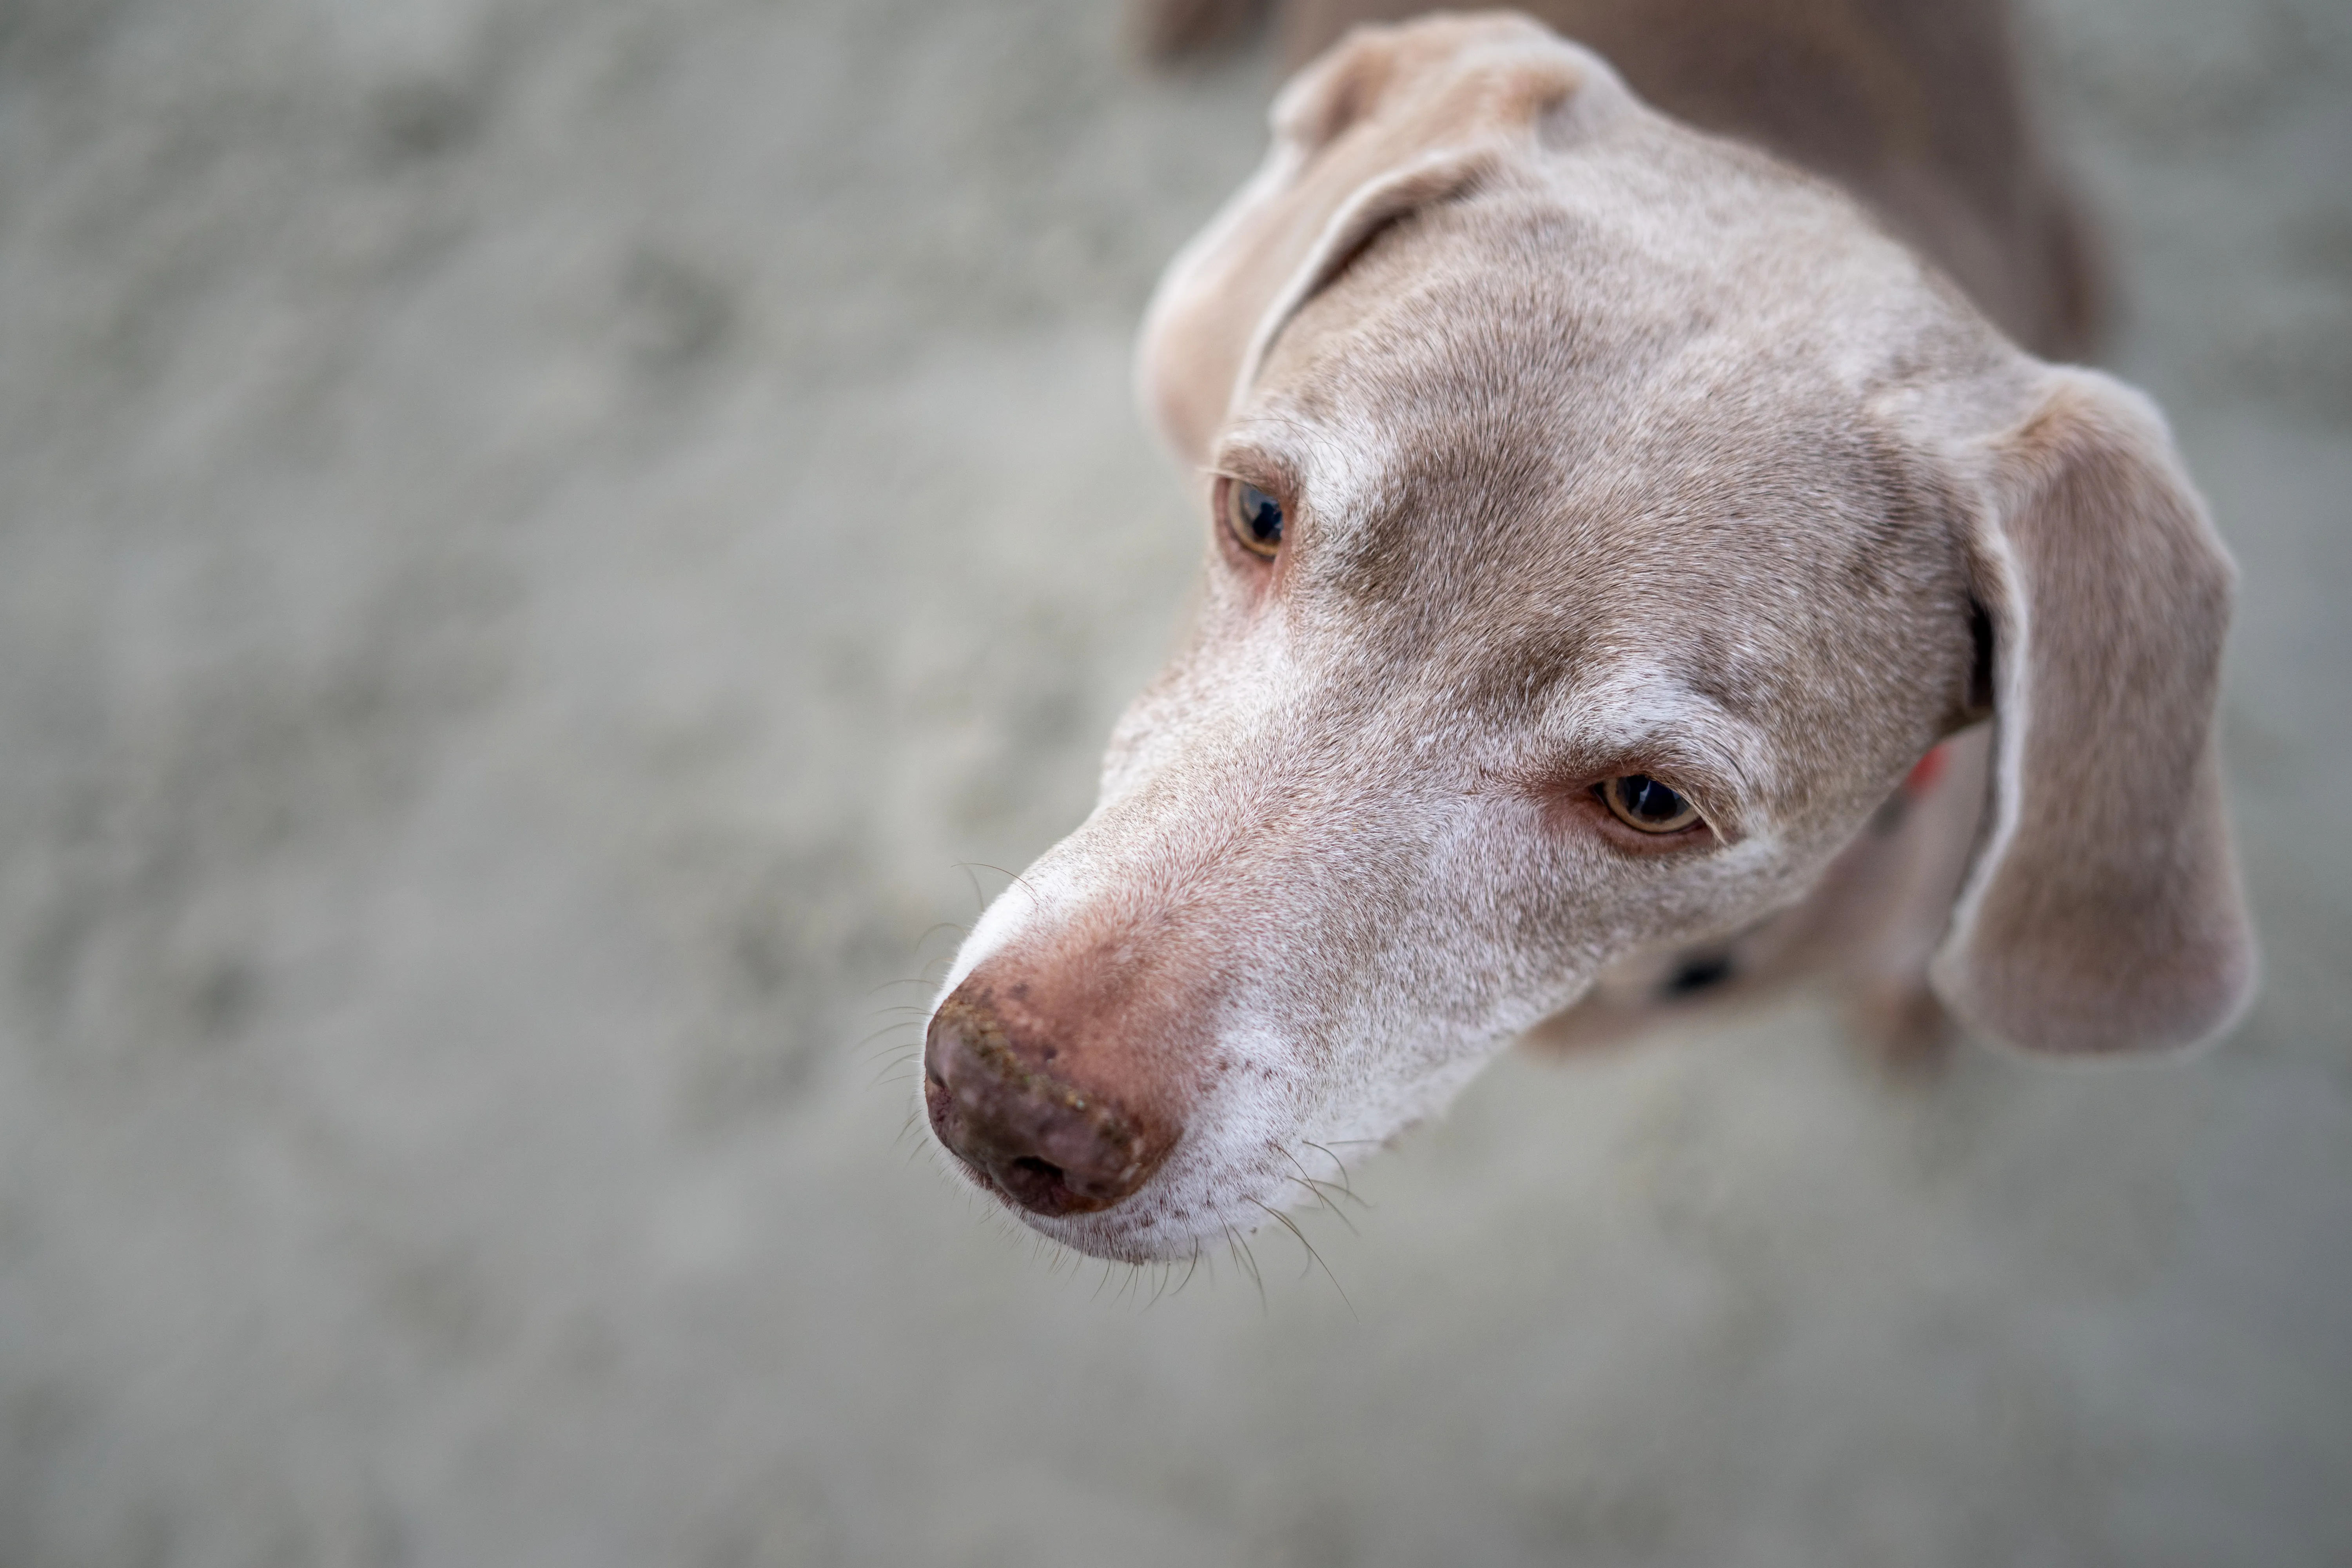 Kimbers from above with a sandy gray background closely resembling the color of her fur.